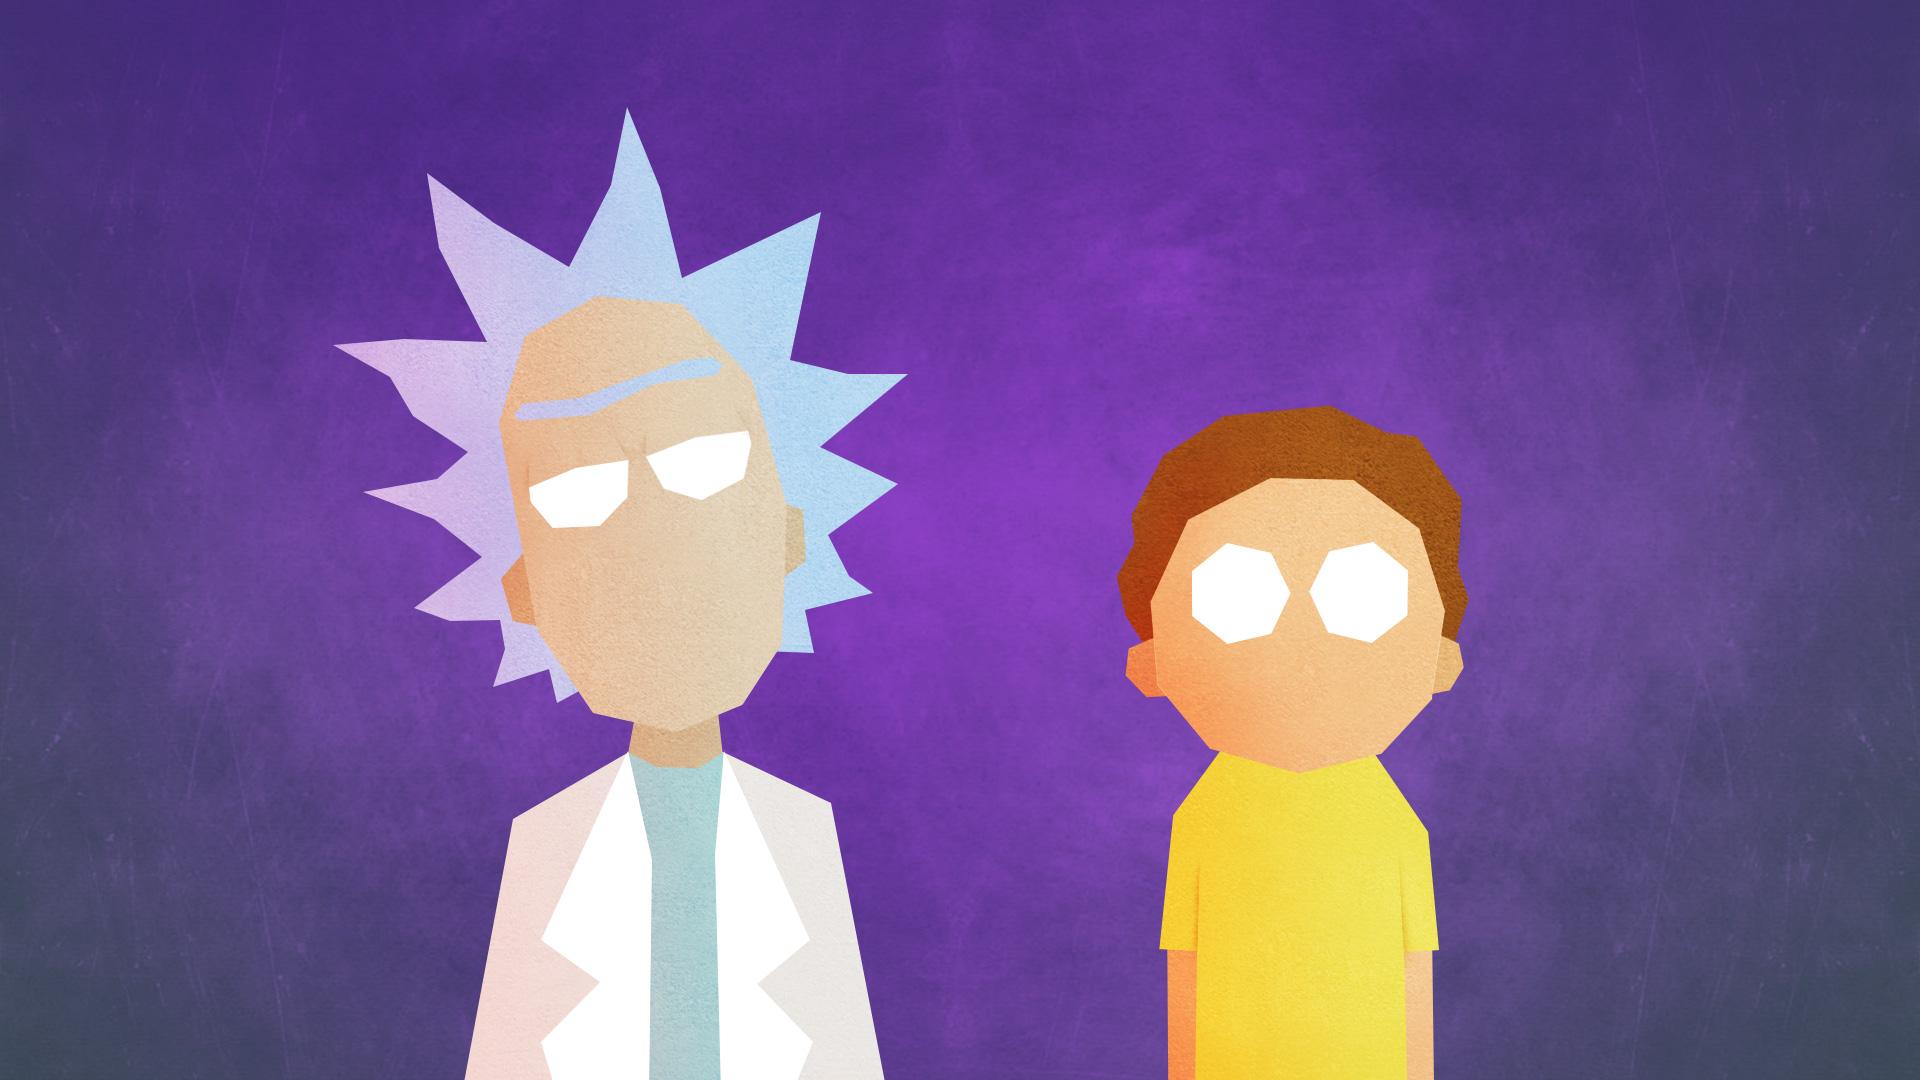 Rick and Morty Wallpapers  Top Best 85 Rick and Morty Backgrounds